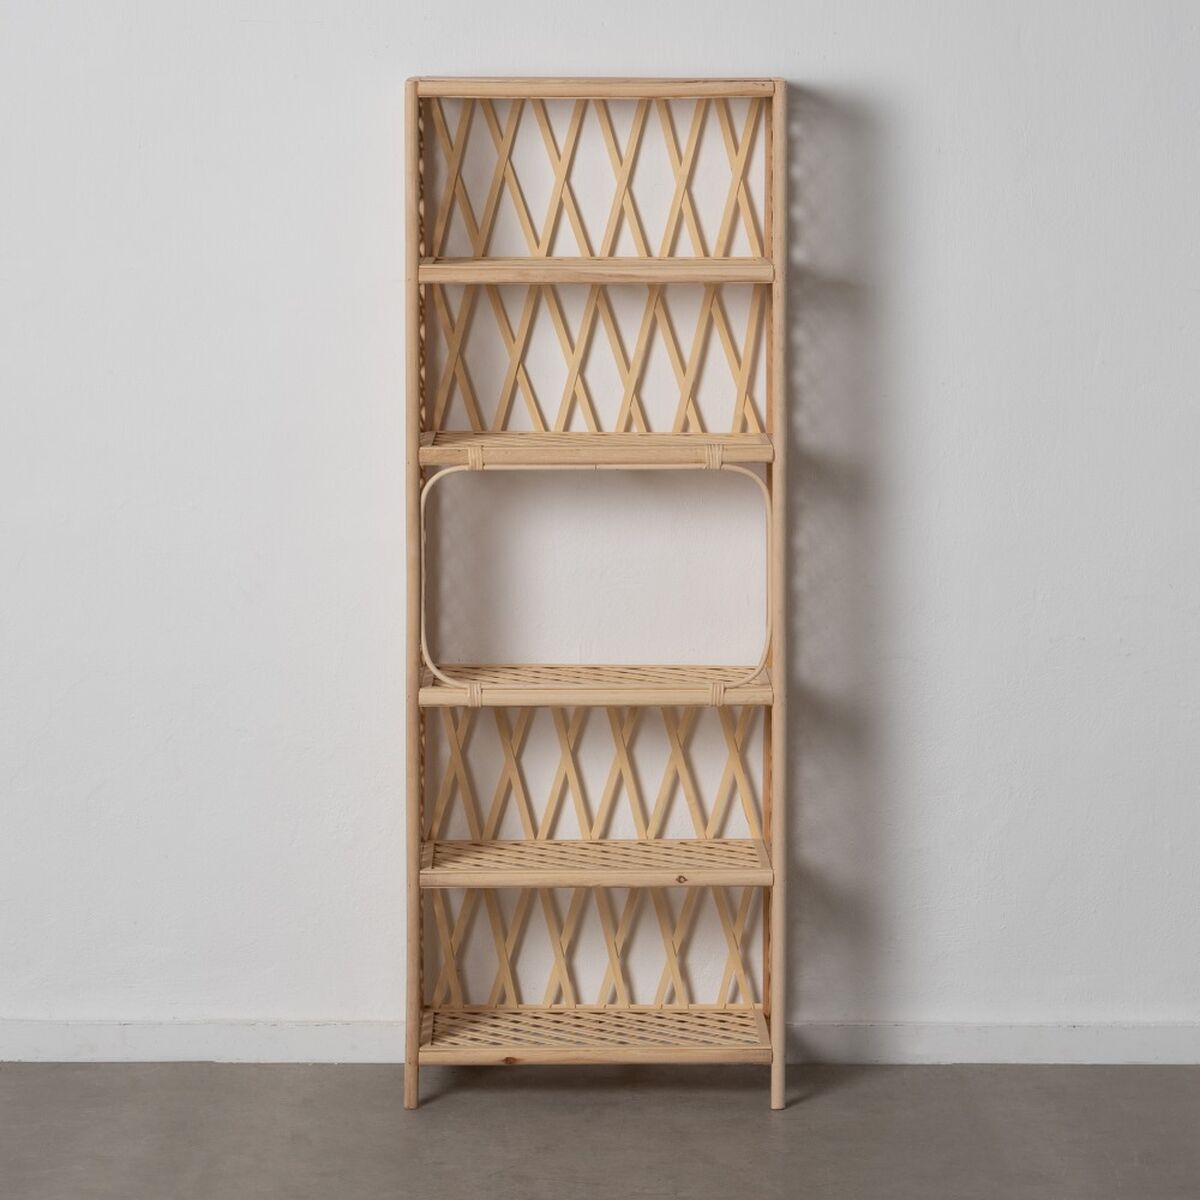 Shelving Unit in Bamboo and Rattan (64 x 34,5 x 171 cm)